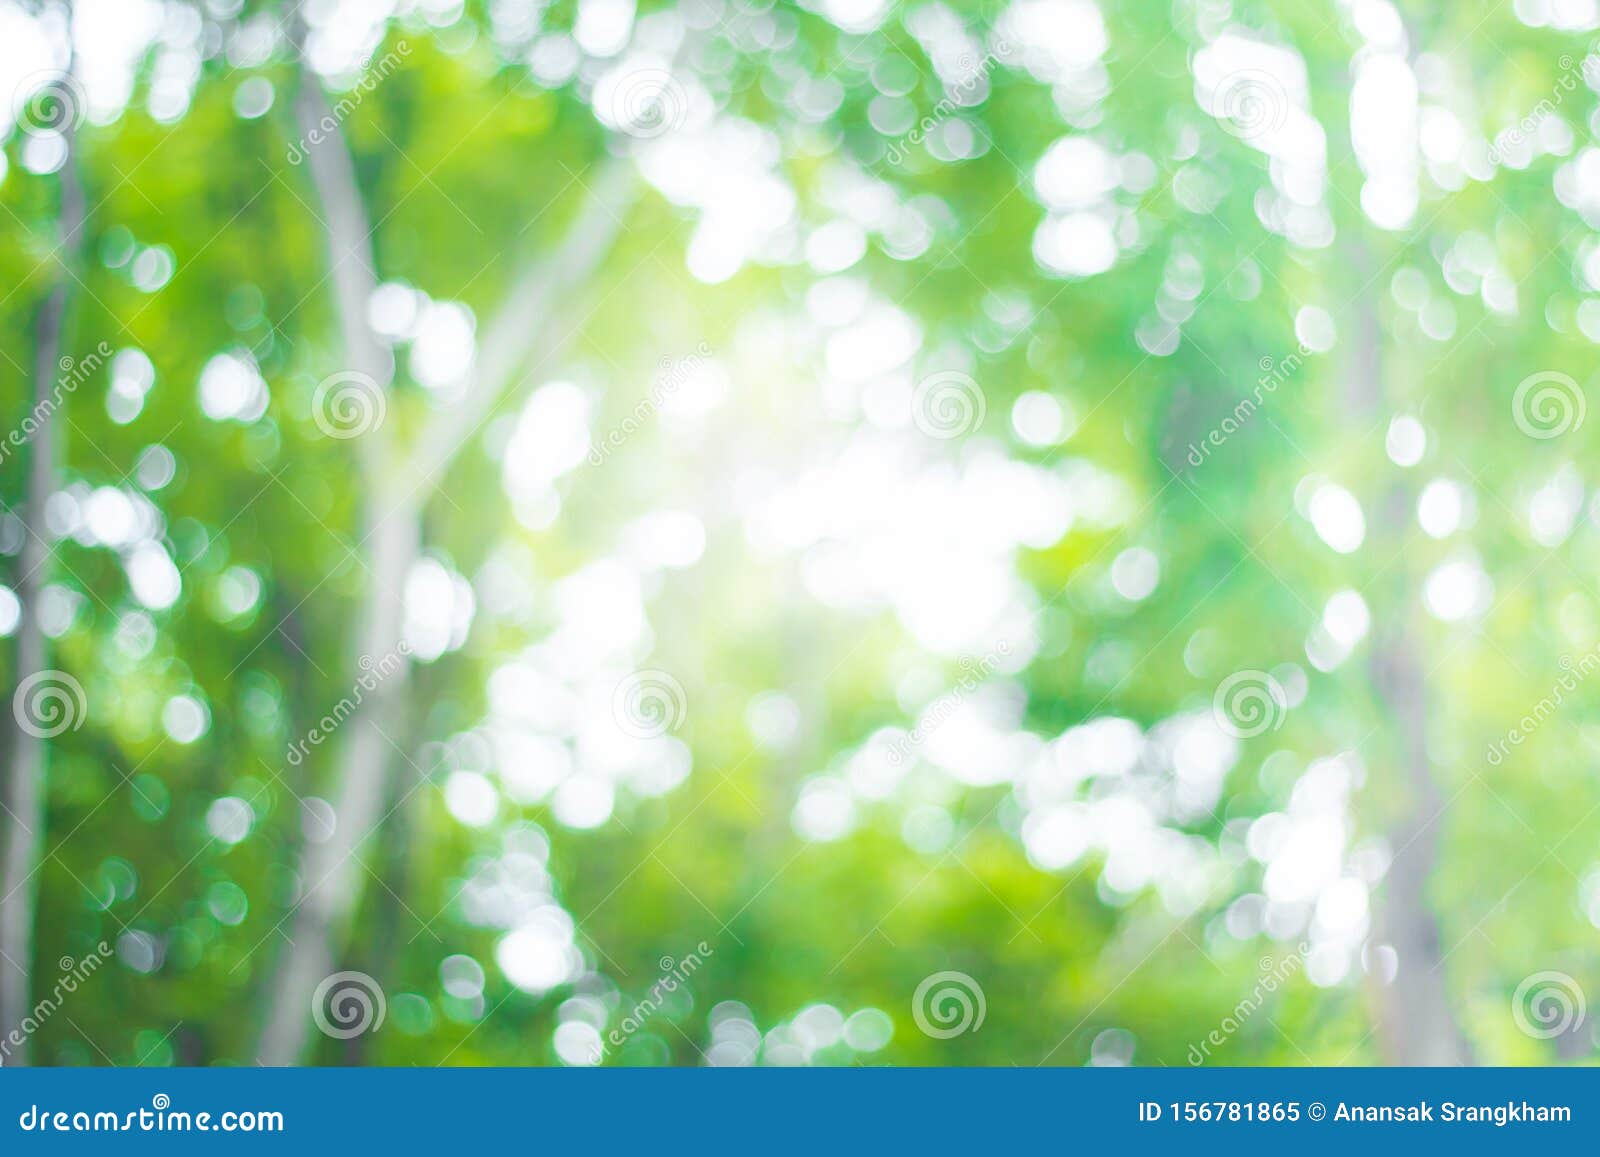 Abstract Green Nature Blur Background and Sunlight Stock Image - Image of  focus, blur: 156781865